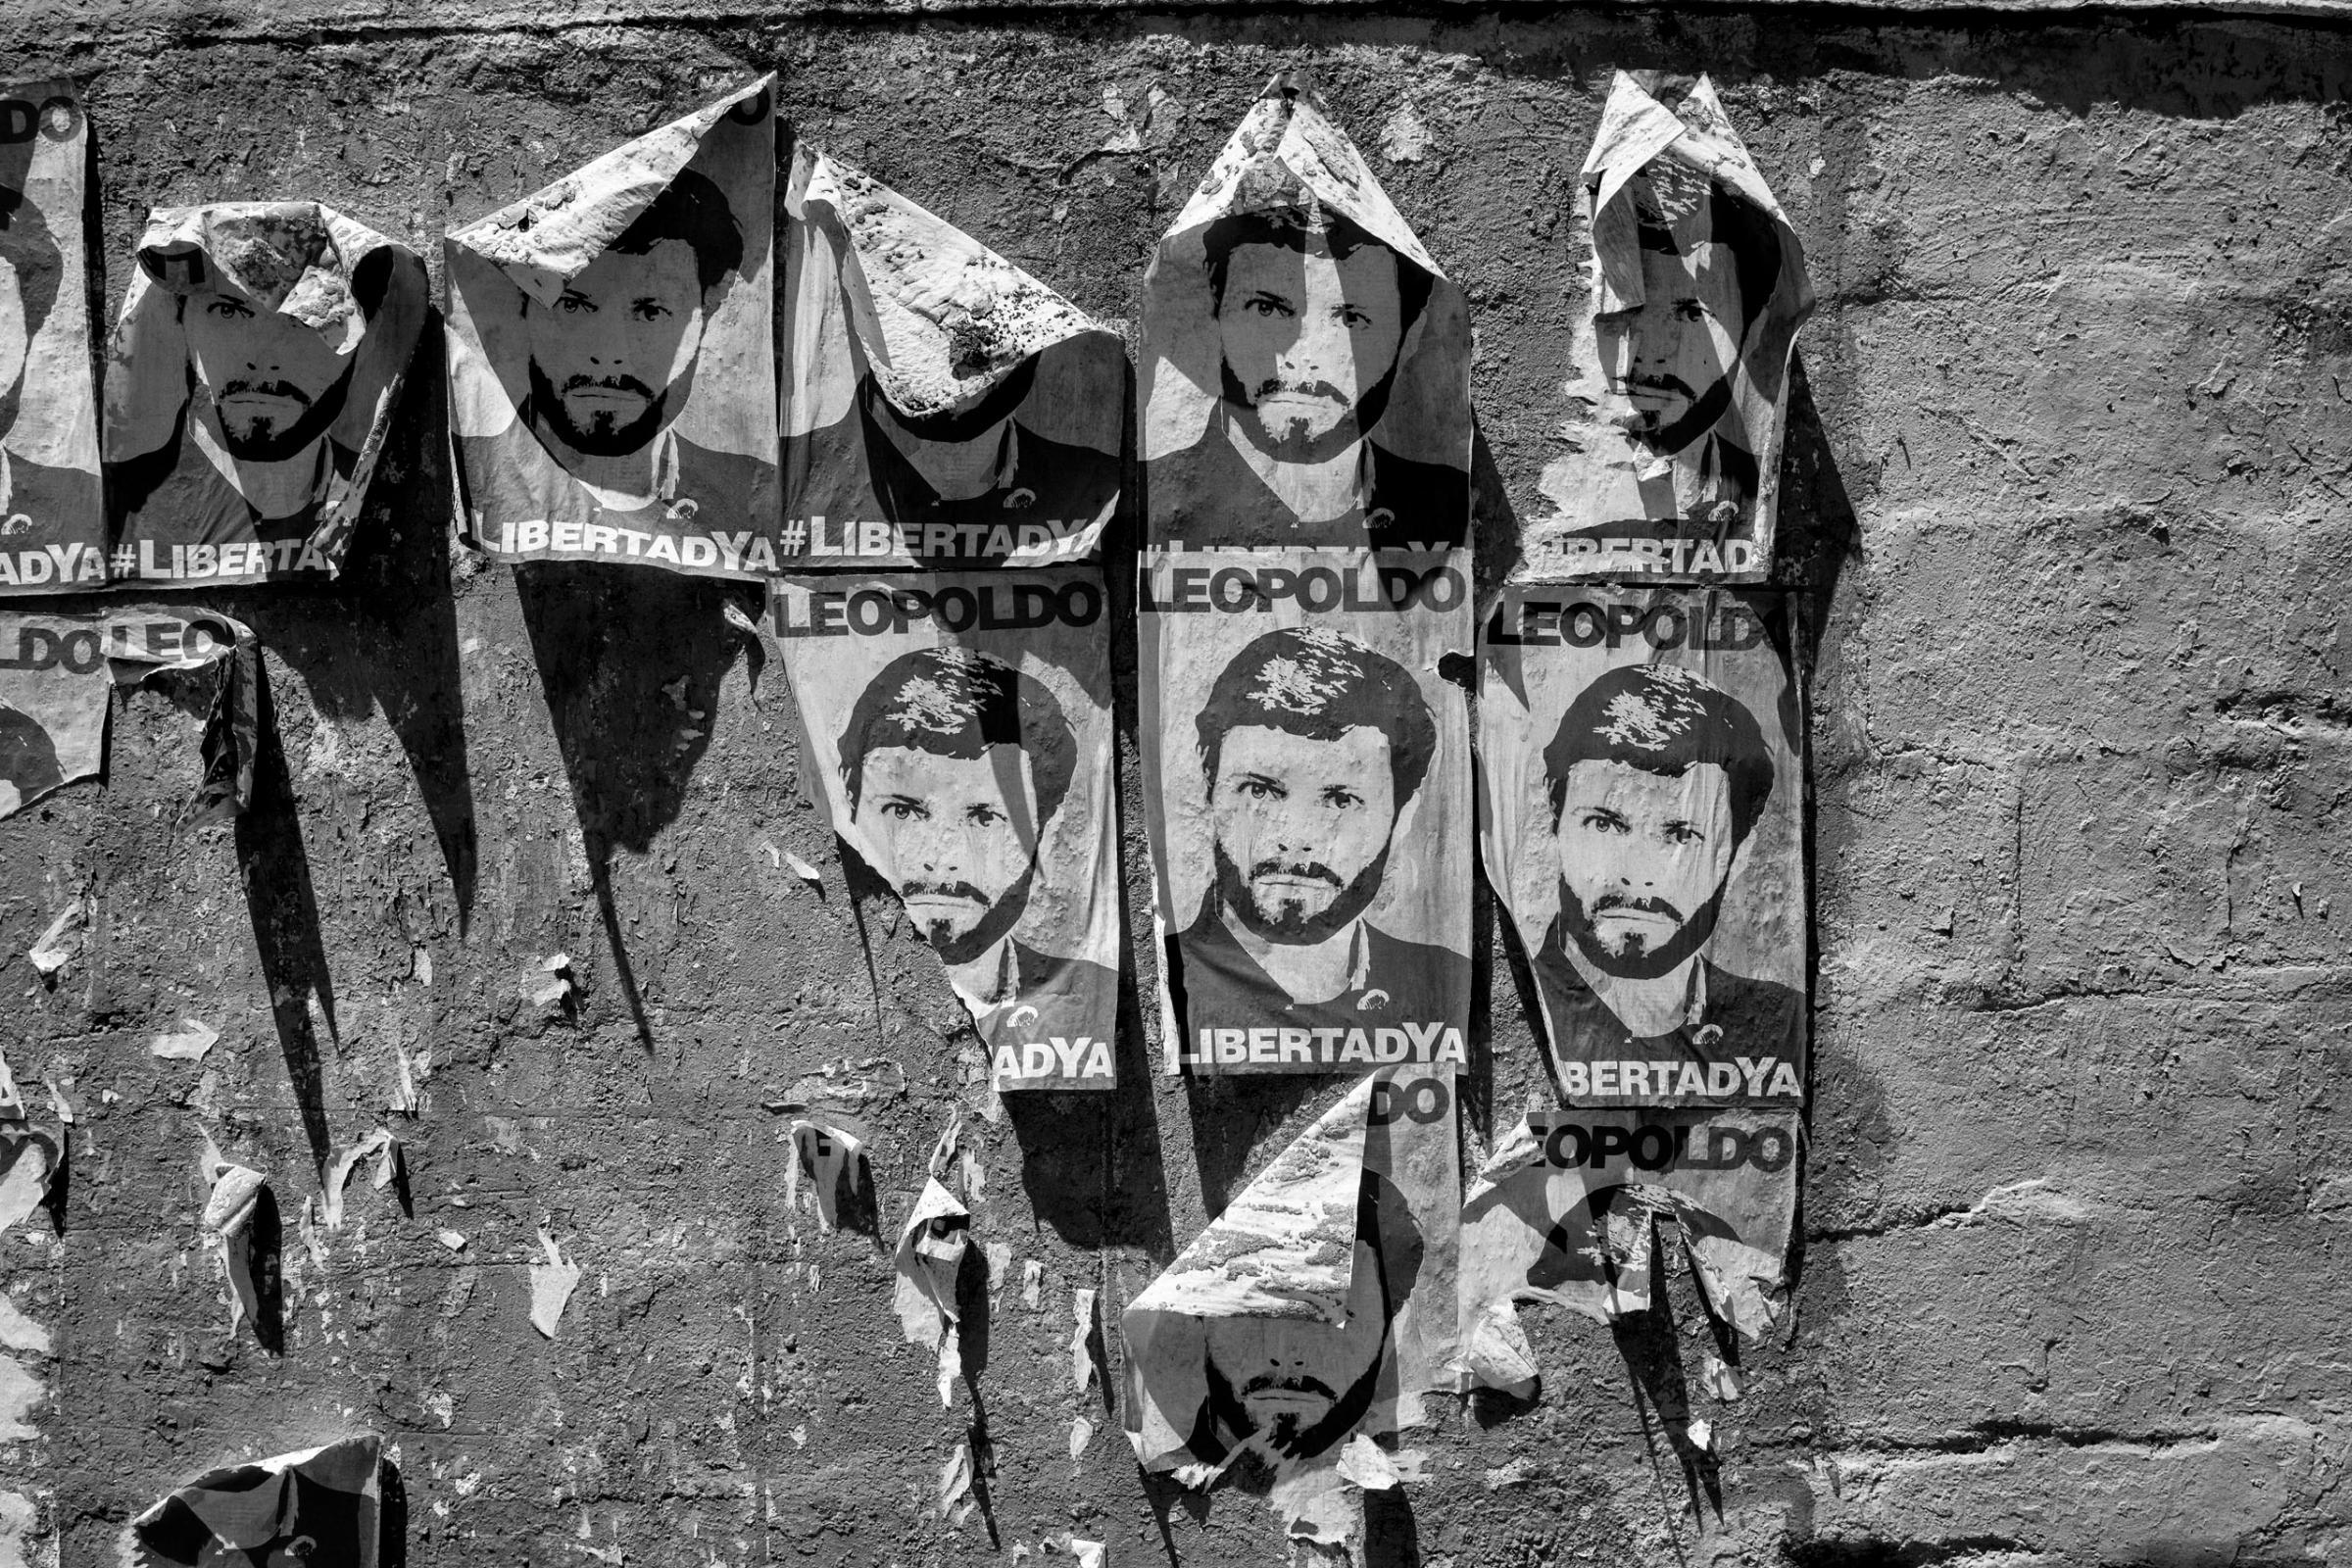 Posters of political prisoner Leopoldo Lopez hang on a wall in Caracas. The Venezuelan government of President Nicolas Maduro has been widely condemned for its treatment of the political opposition, including most notably Leopoldo Lopez, leader of the opposition, who is serving a 14-year sentence, June, 2016.